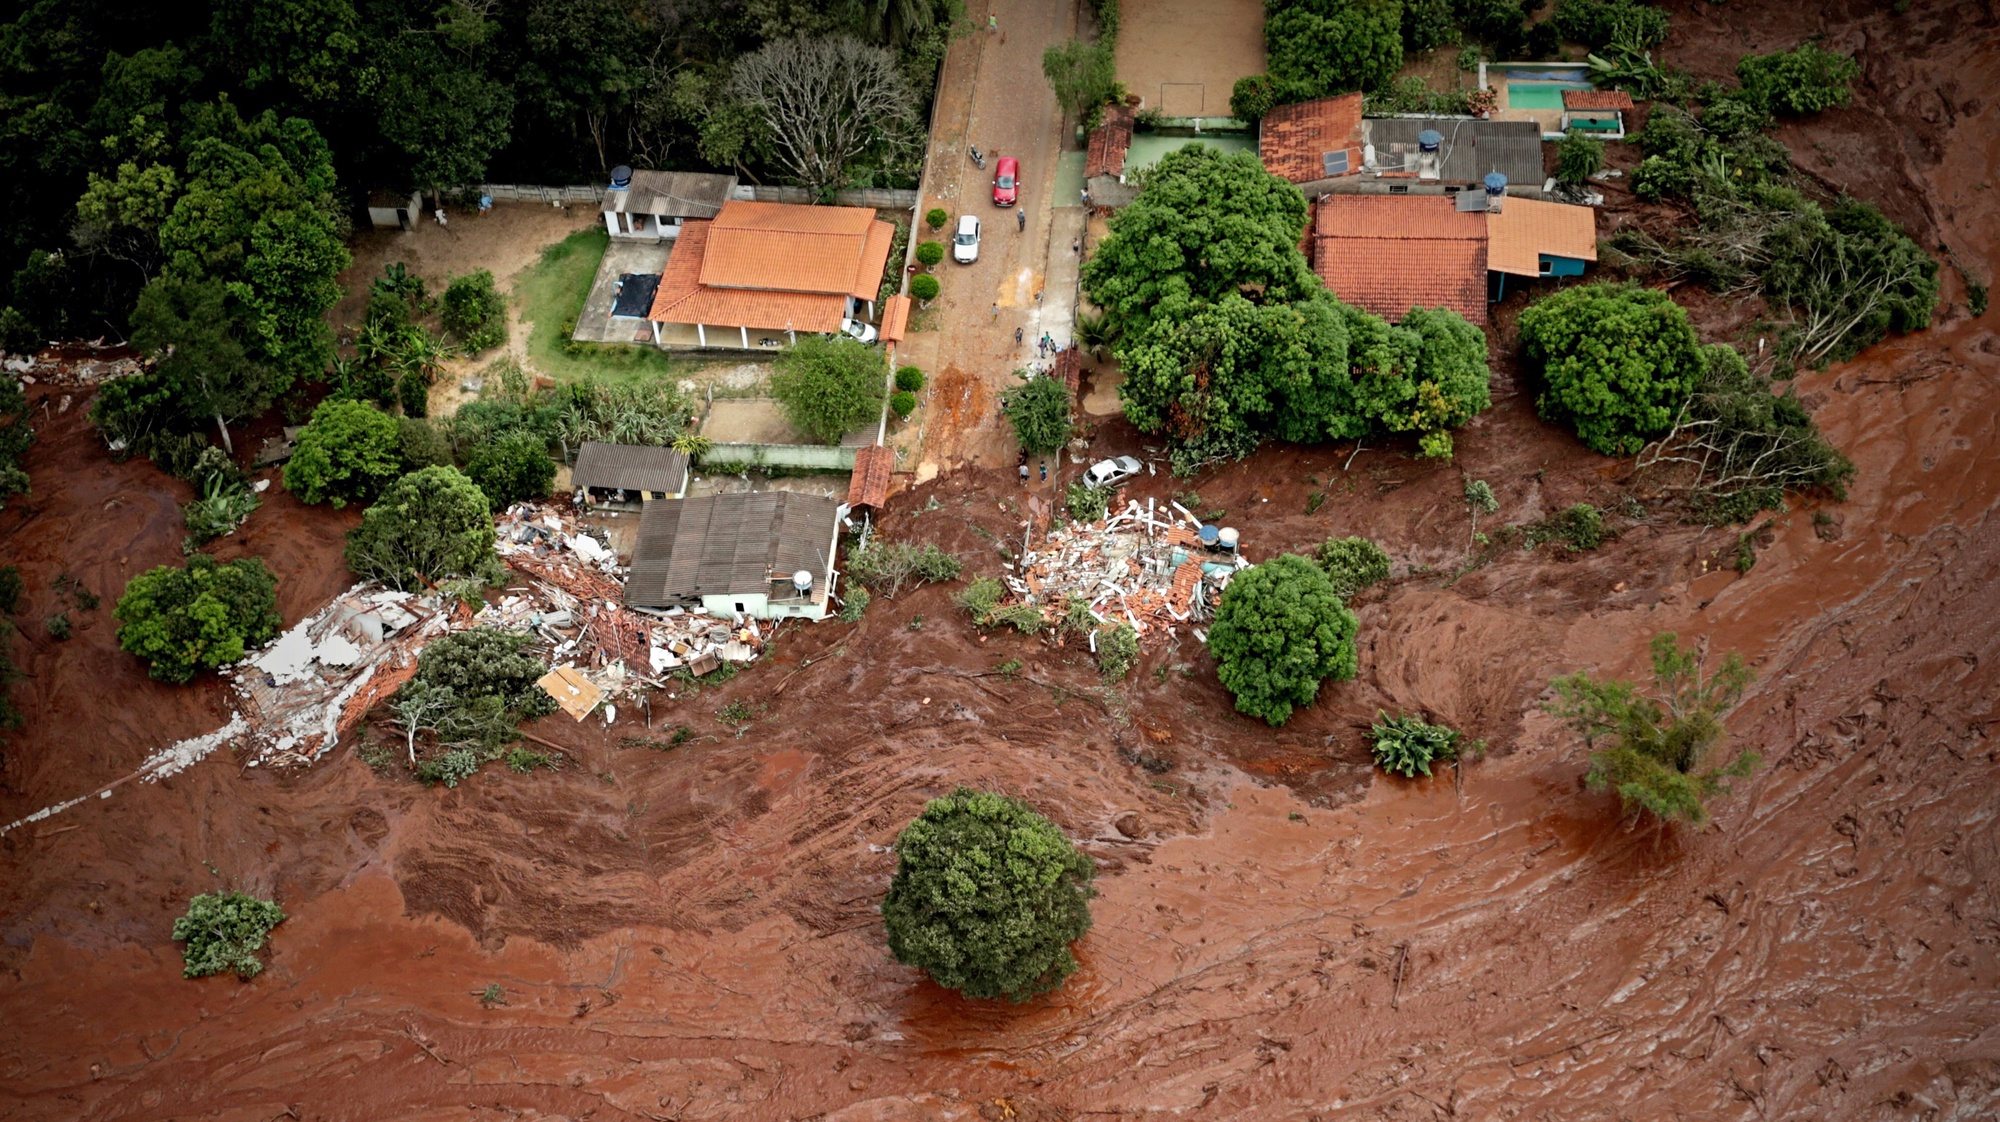 epa08986842 (FILE) An a erial view o  mud and waste from the disaster caused by dam spill in Brumadinho, Minas Gerais, Brazil, 26 January 2019 (reissued 04 February 2021). Brazilian mining giant Vale SA reached a settlement agreement with the Brazilian state for the deadly Brumadinho dam disaster in January 2019, which killed 270 people. The iron ore producer will pay 7.03 billion USD, Vale said 04 February 2021.  EPA/Antonio Lacerda